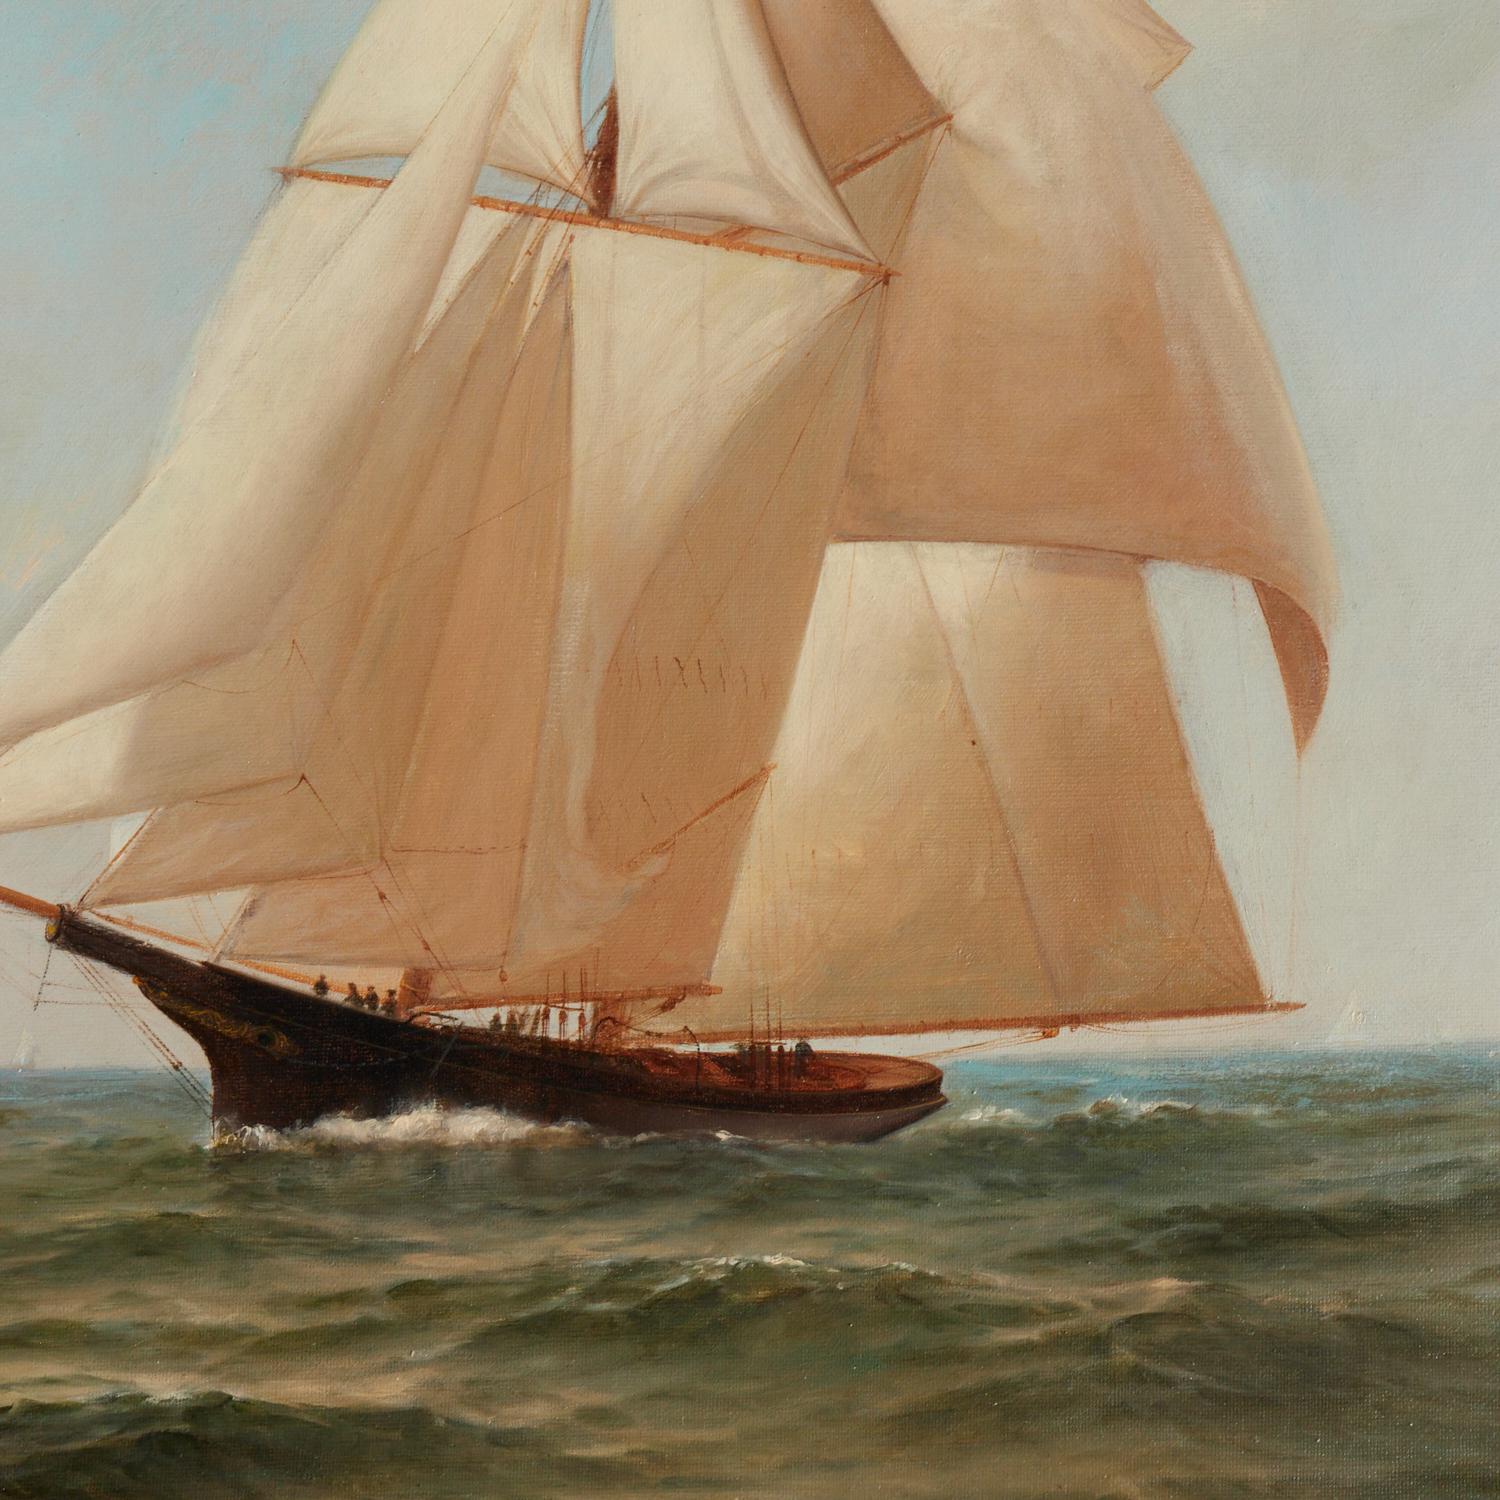 Warren W. Sheppard (American, 1858-1937), Yacht race, possibly the America's Cup, signed lower right. The yacht in the foreground appears to be flying the flag of the New York Yacht Club.

The painting is in a lovely giltwood frame that appears